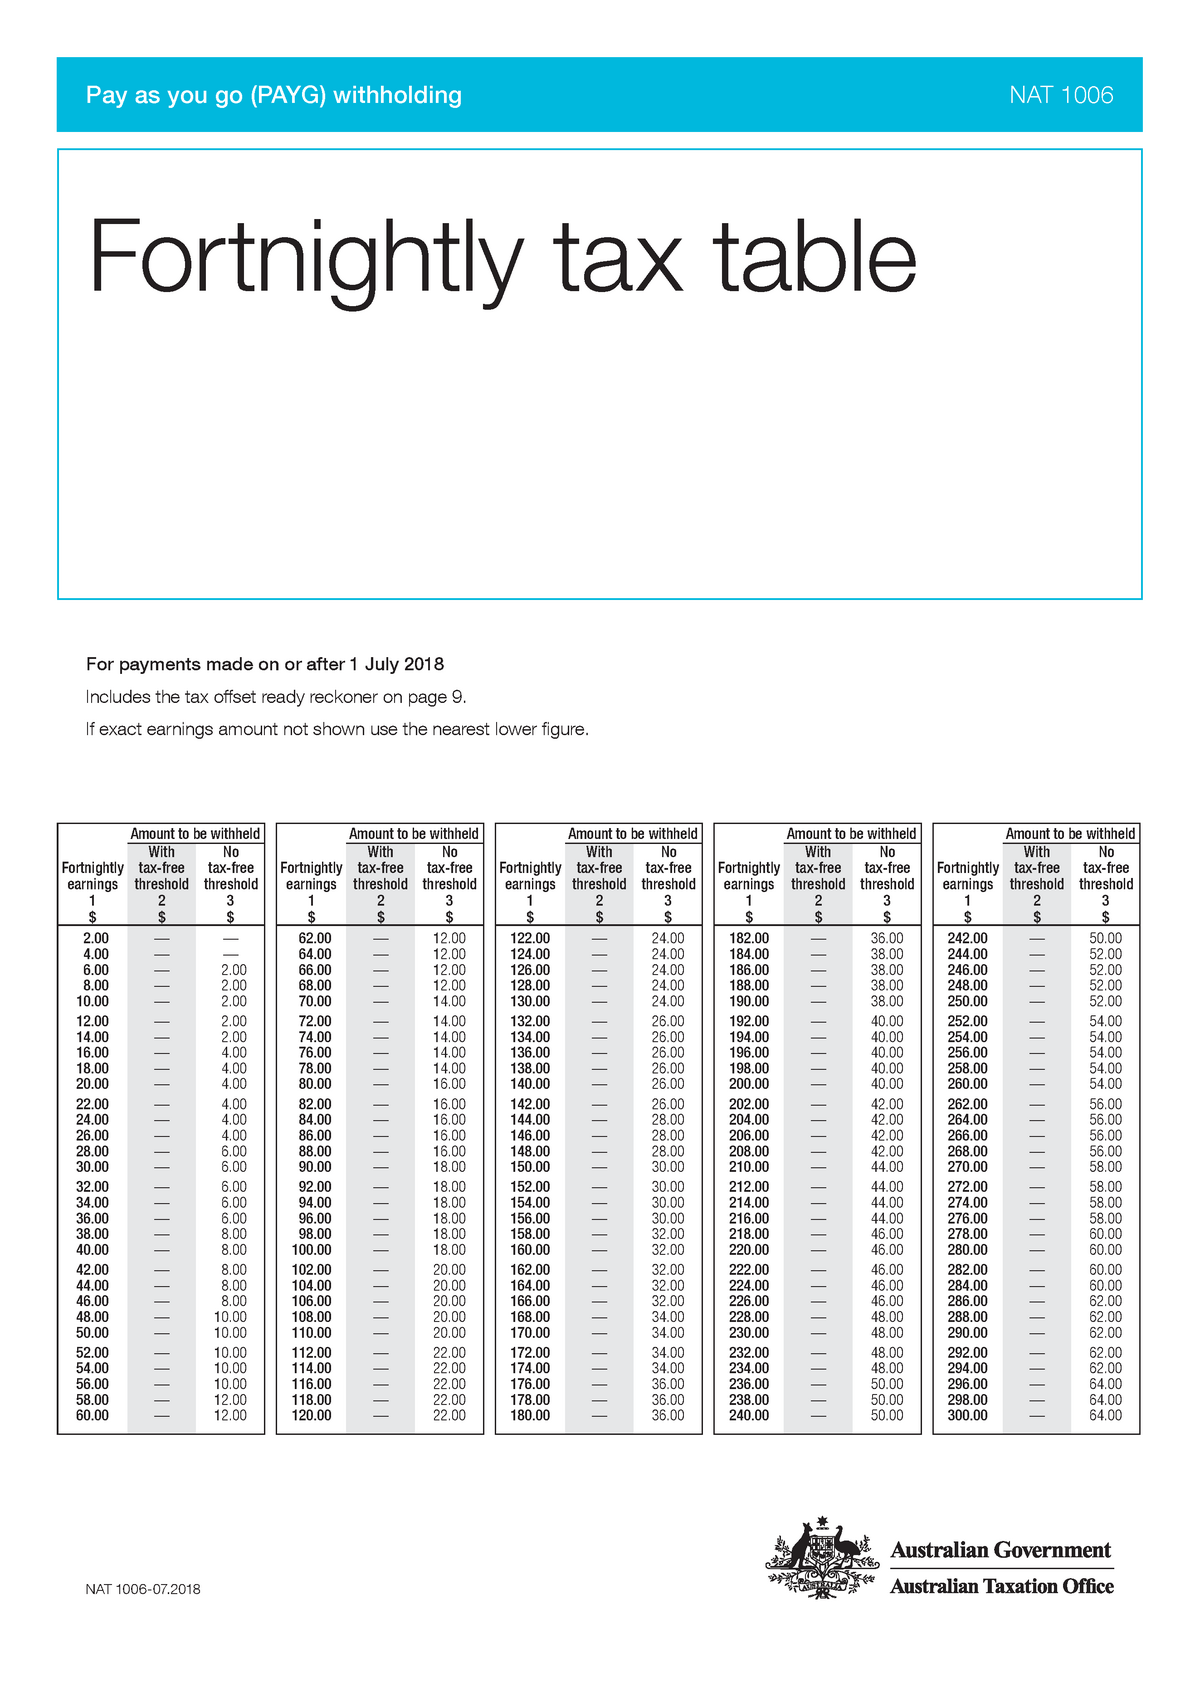 fortnightly-tax-table-from-1-july-2018-nat-1006-07-pay-as-you-go